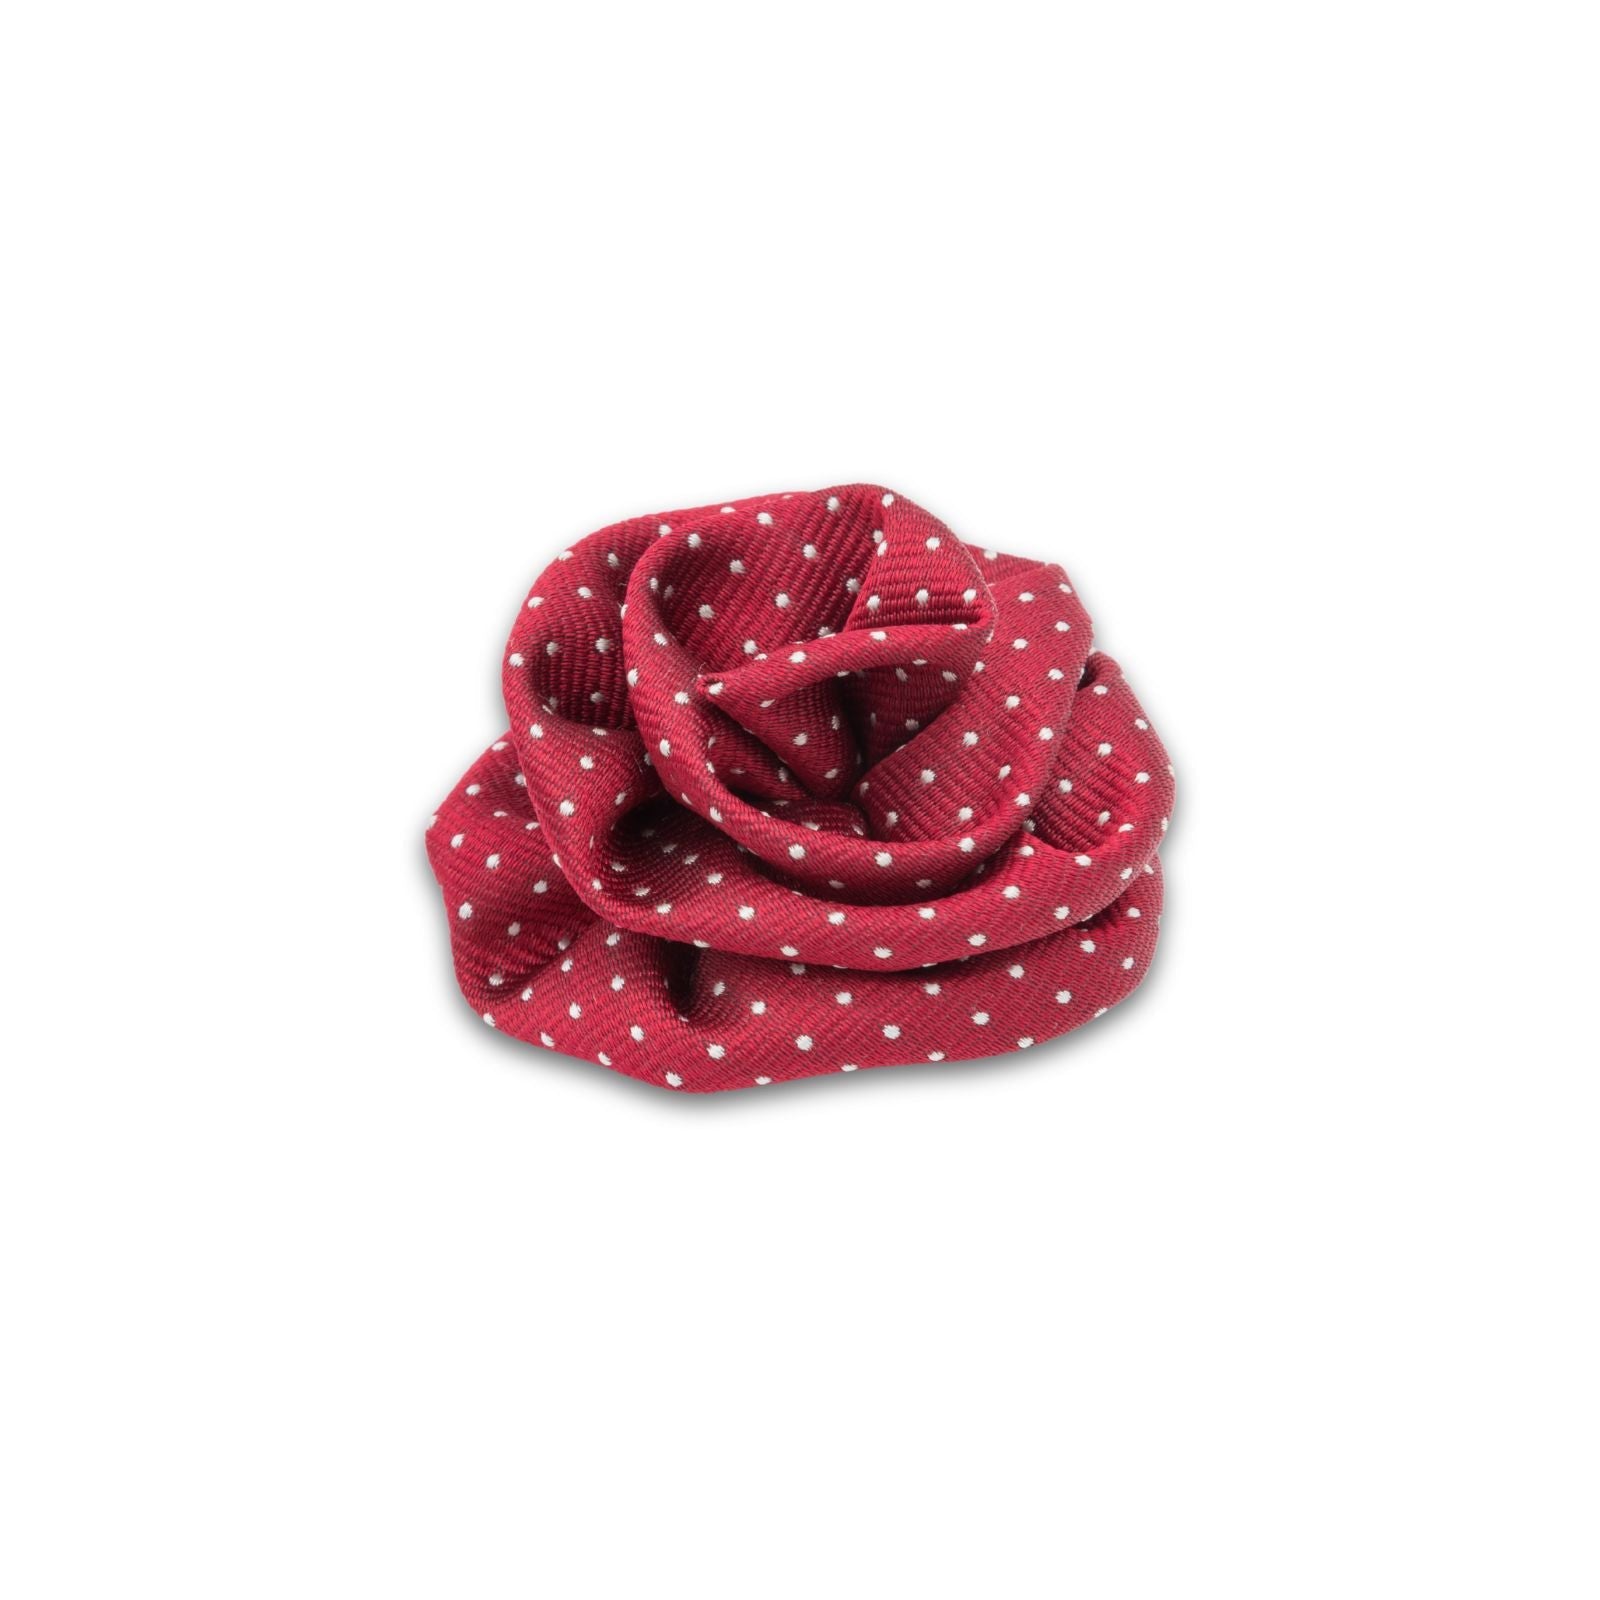 MyBoutonniere | Bordeaux with White Pois Vintage Silk Small